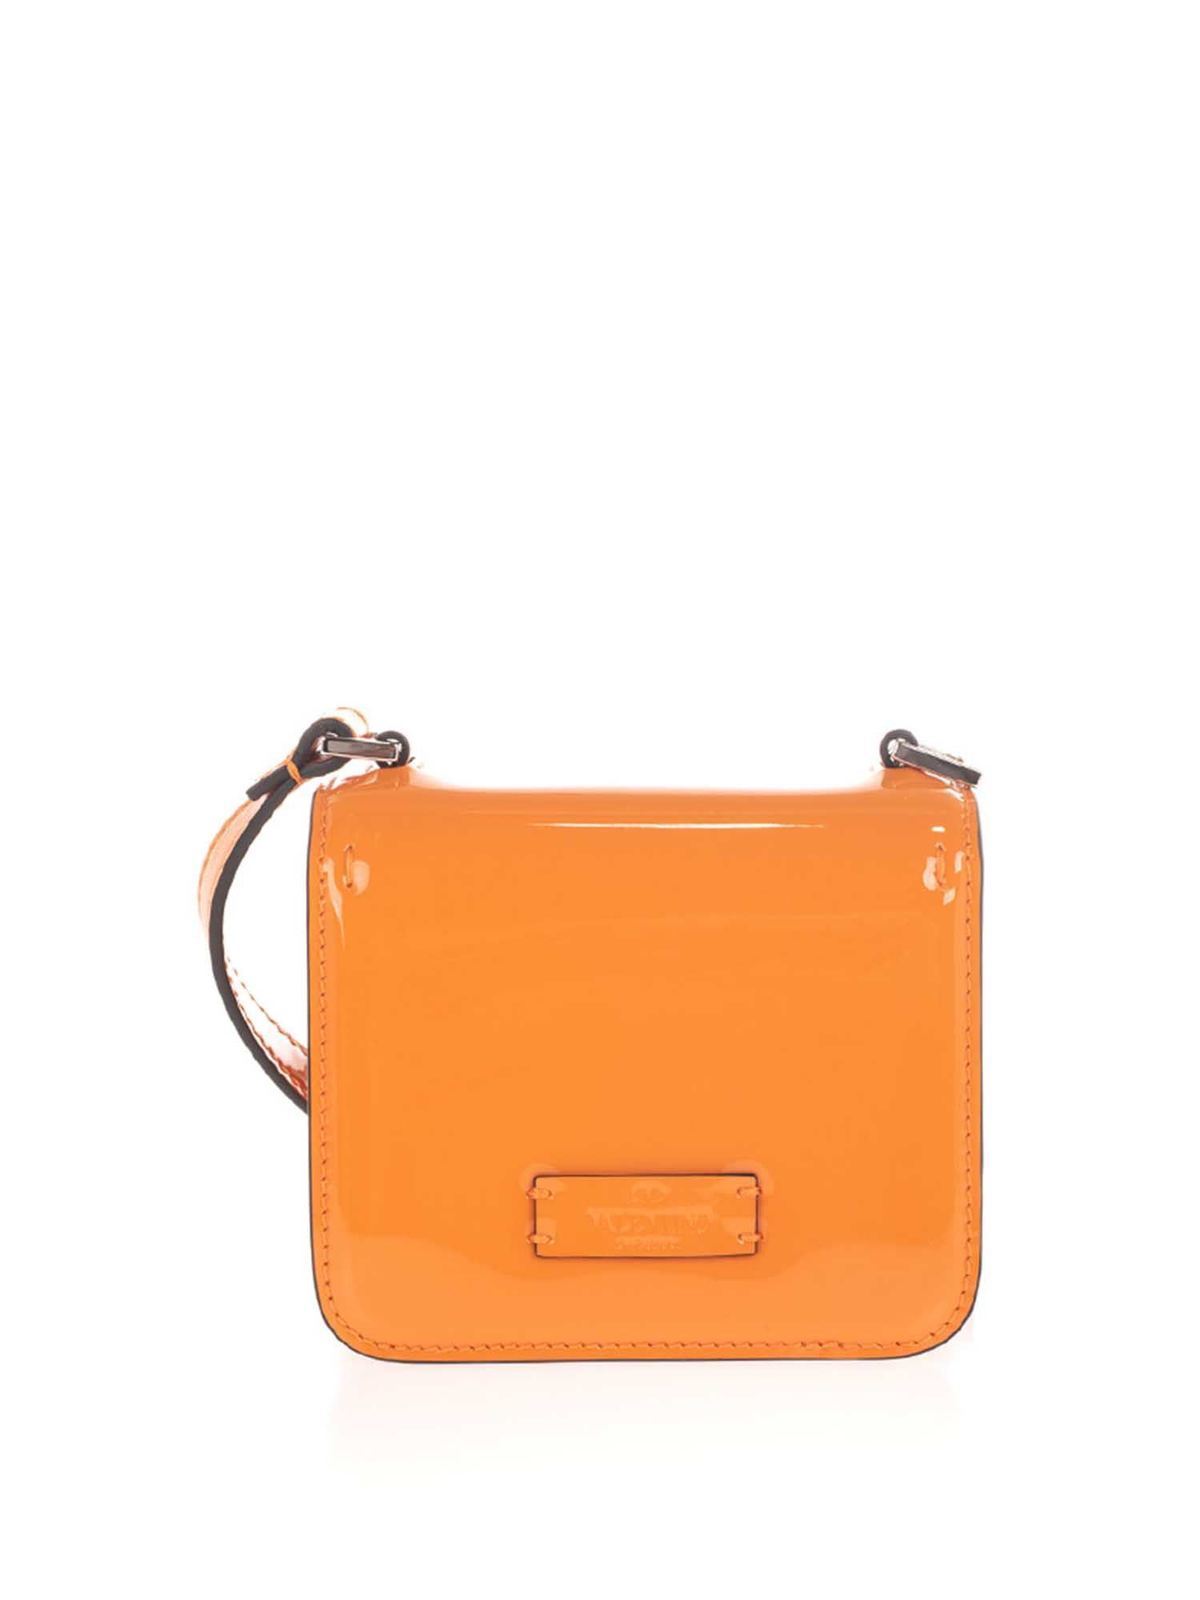 Valentino Yellow Leather Micro VSLING Shoulder Bag Valentino